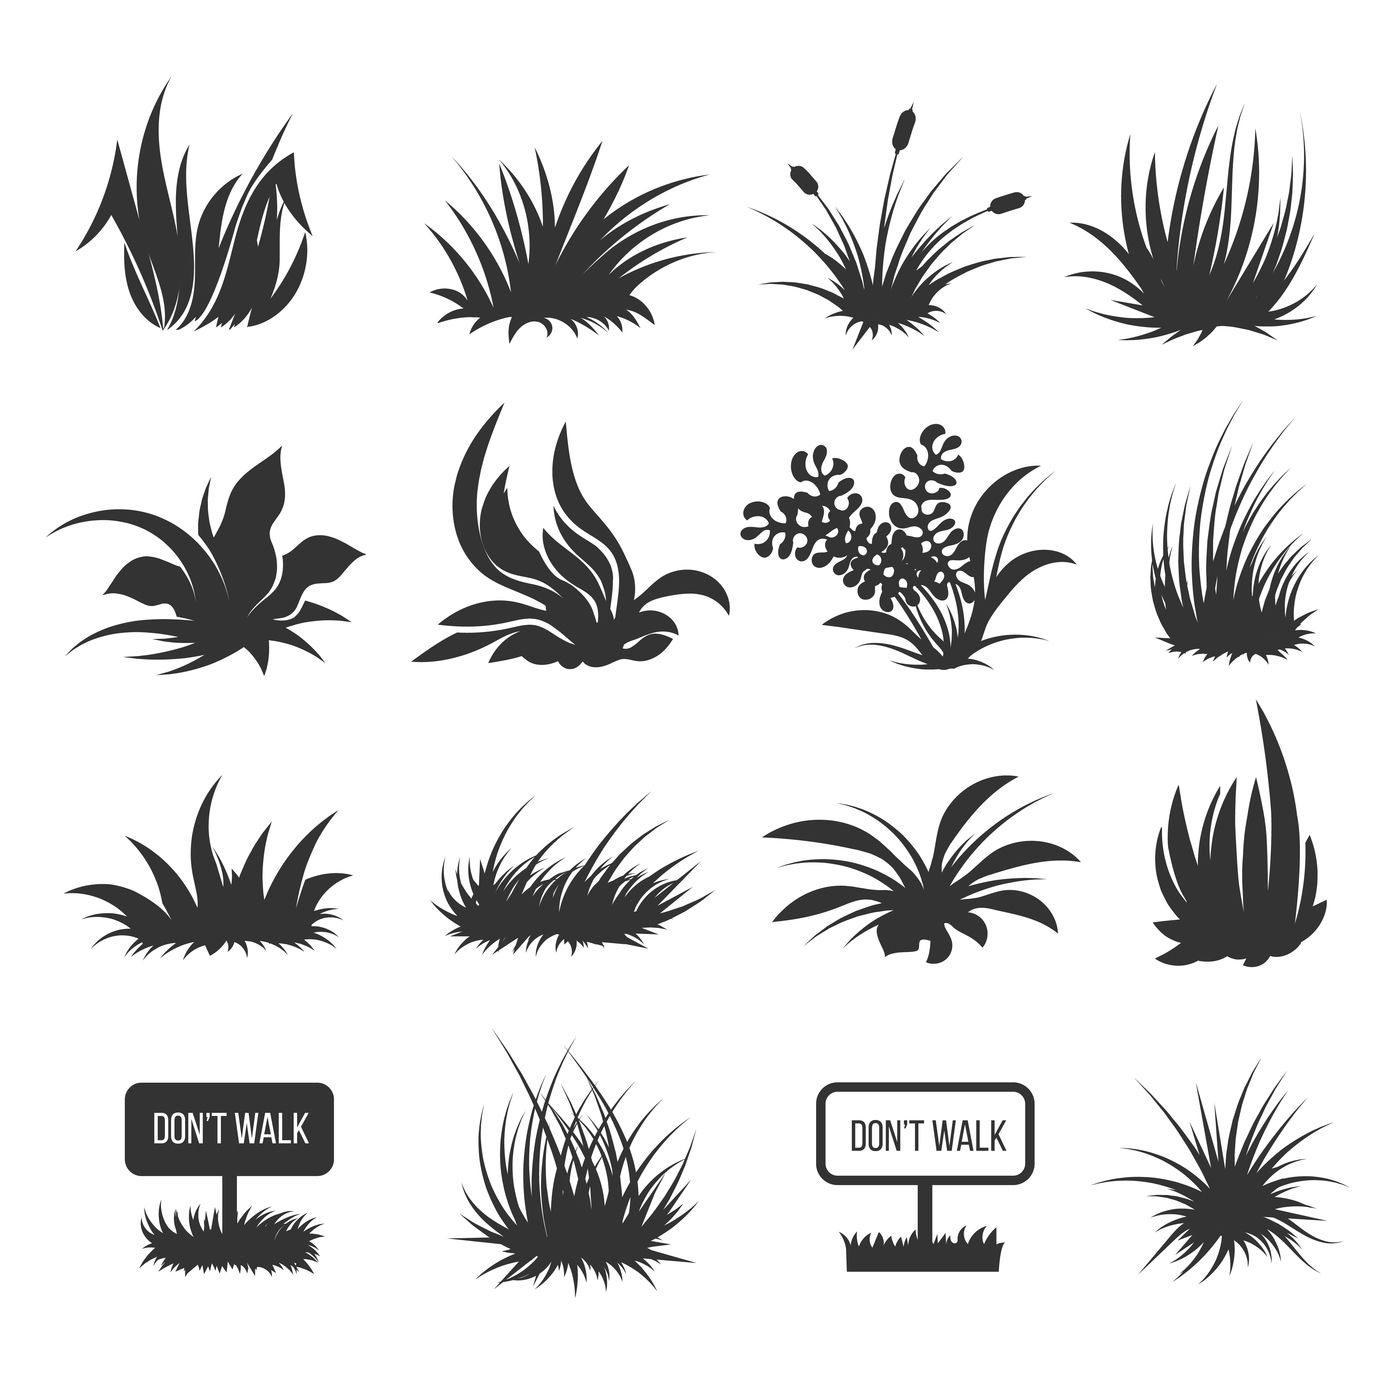 Download Grass and lawn vector silhouettes By Microvector | TheHungryJPEG.com